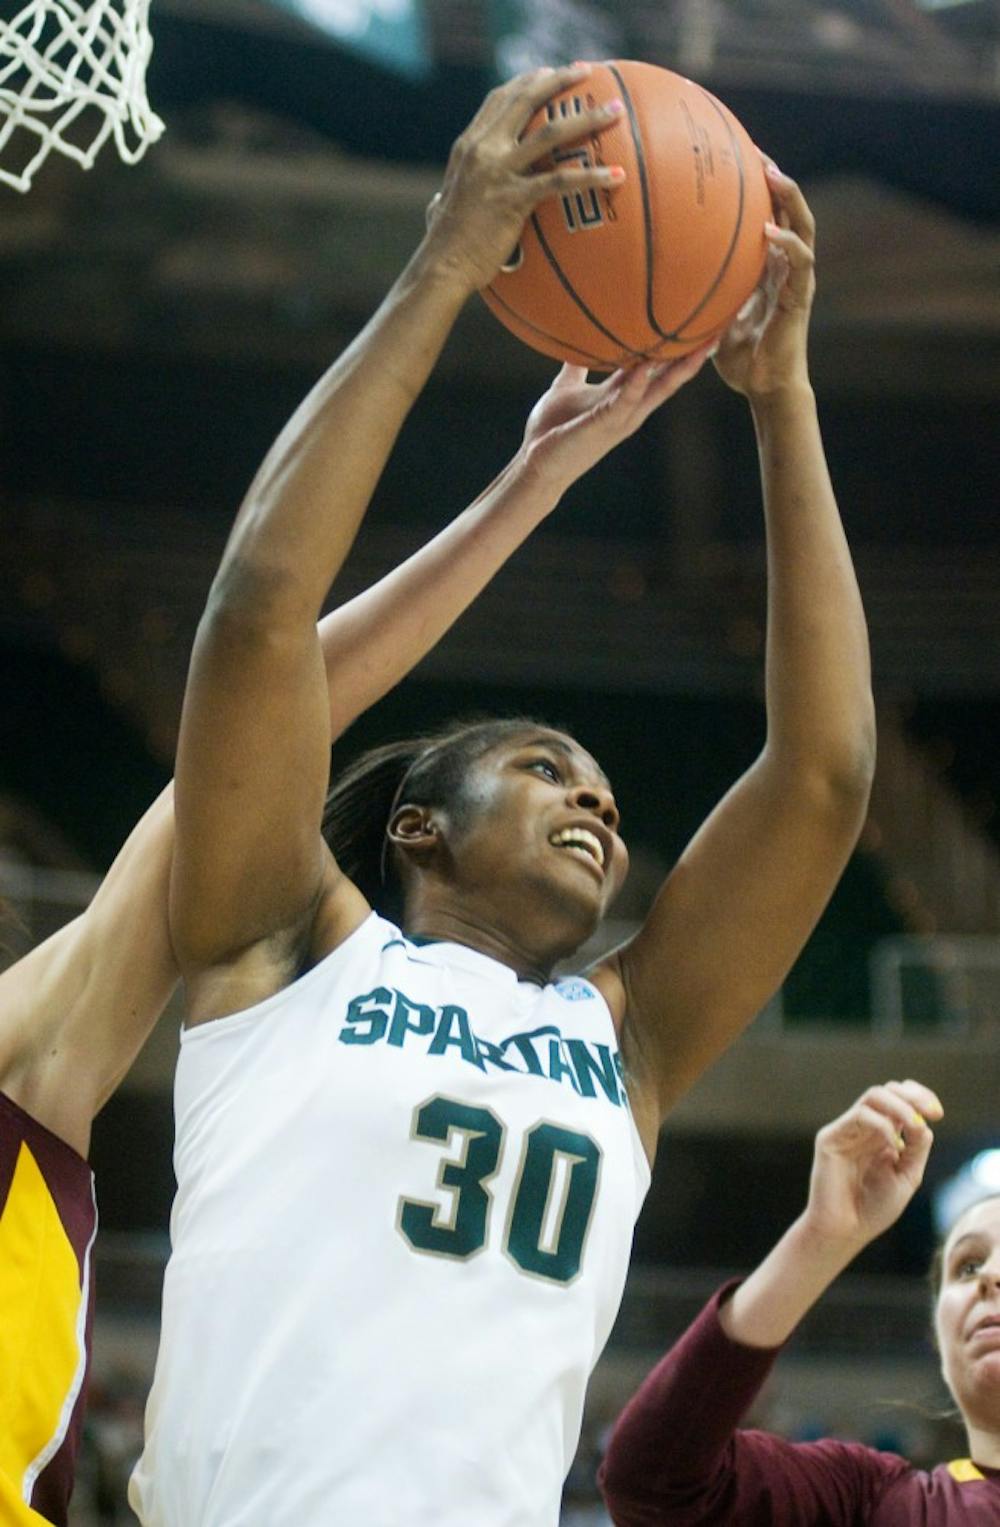 Junior forward Lykendra Johnson snatches a rebound from Minnesota on Sunday at Breslin Center. Johnson led the Spartans to a, 66-54, win with 17 rebounds and 20 points. Kat Petersen/The State News